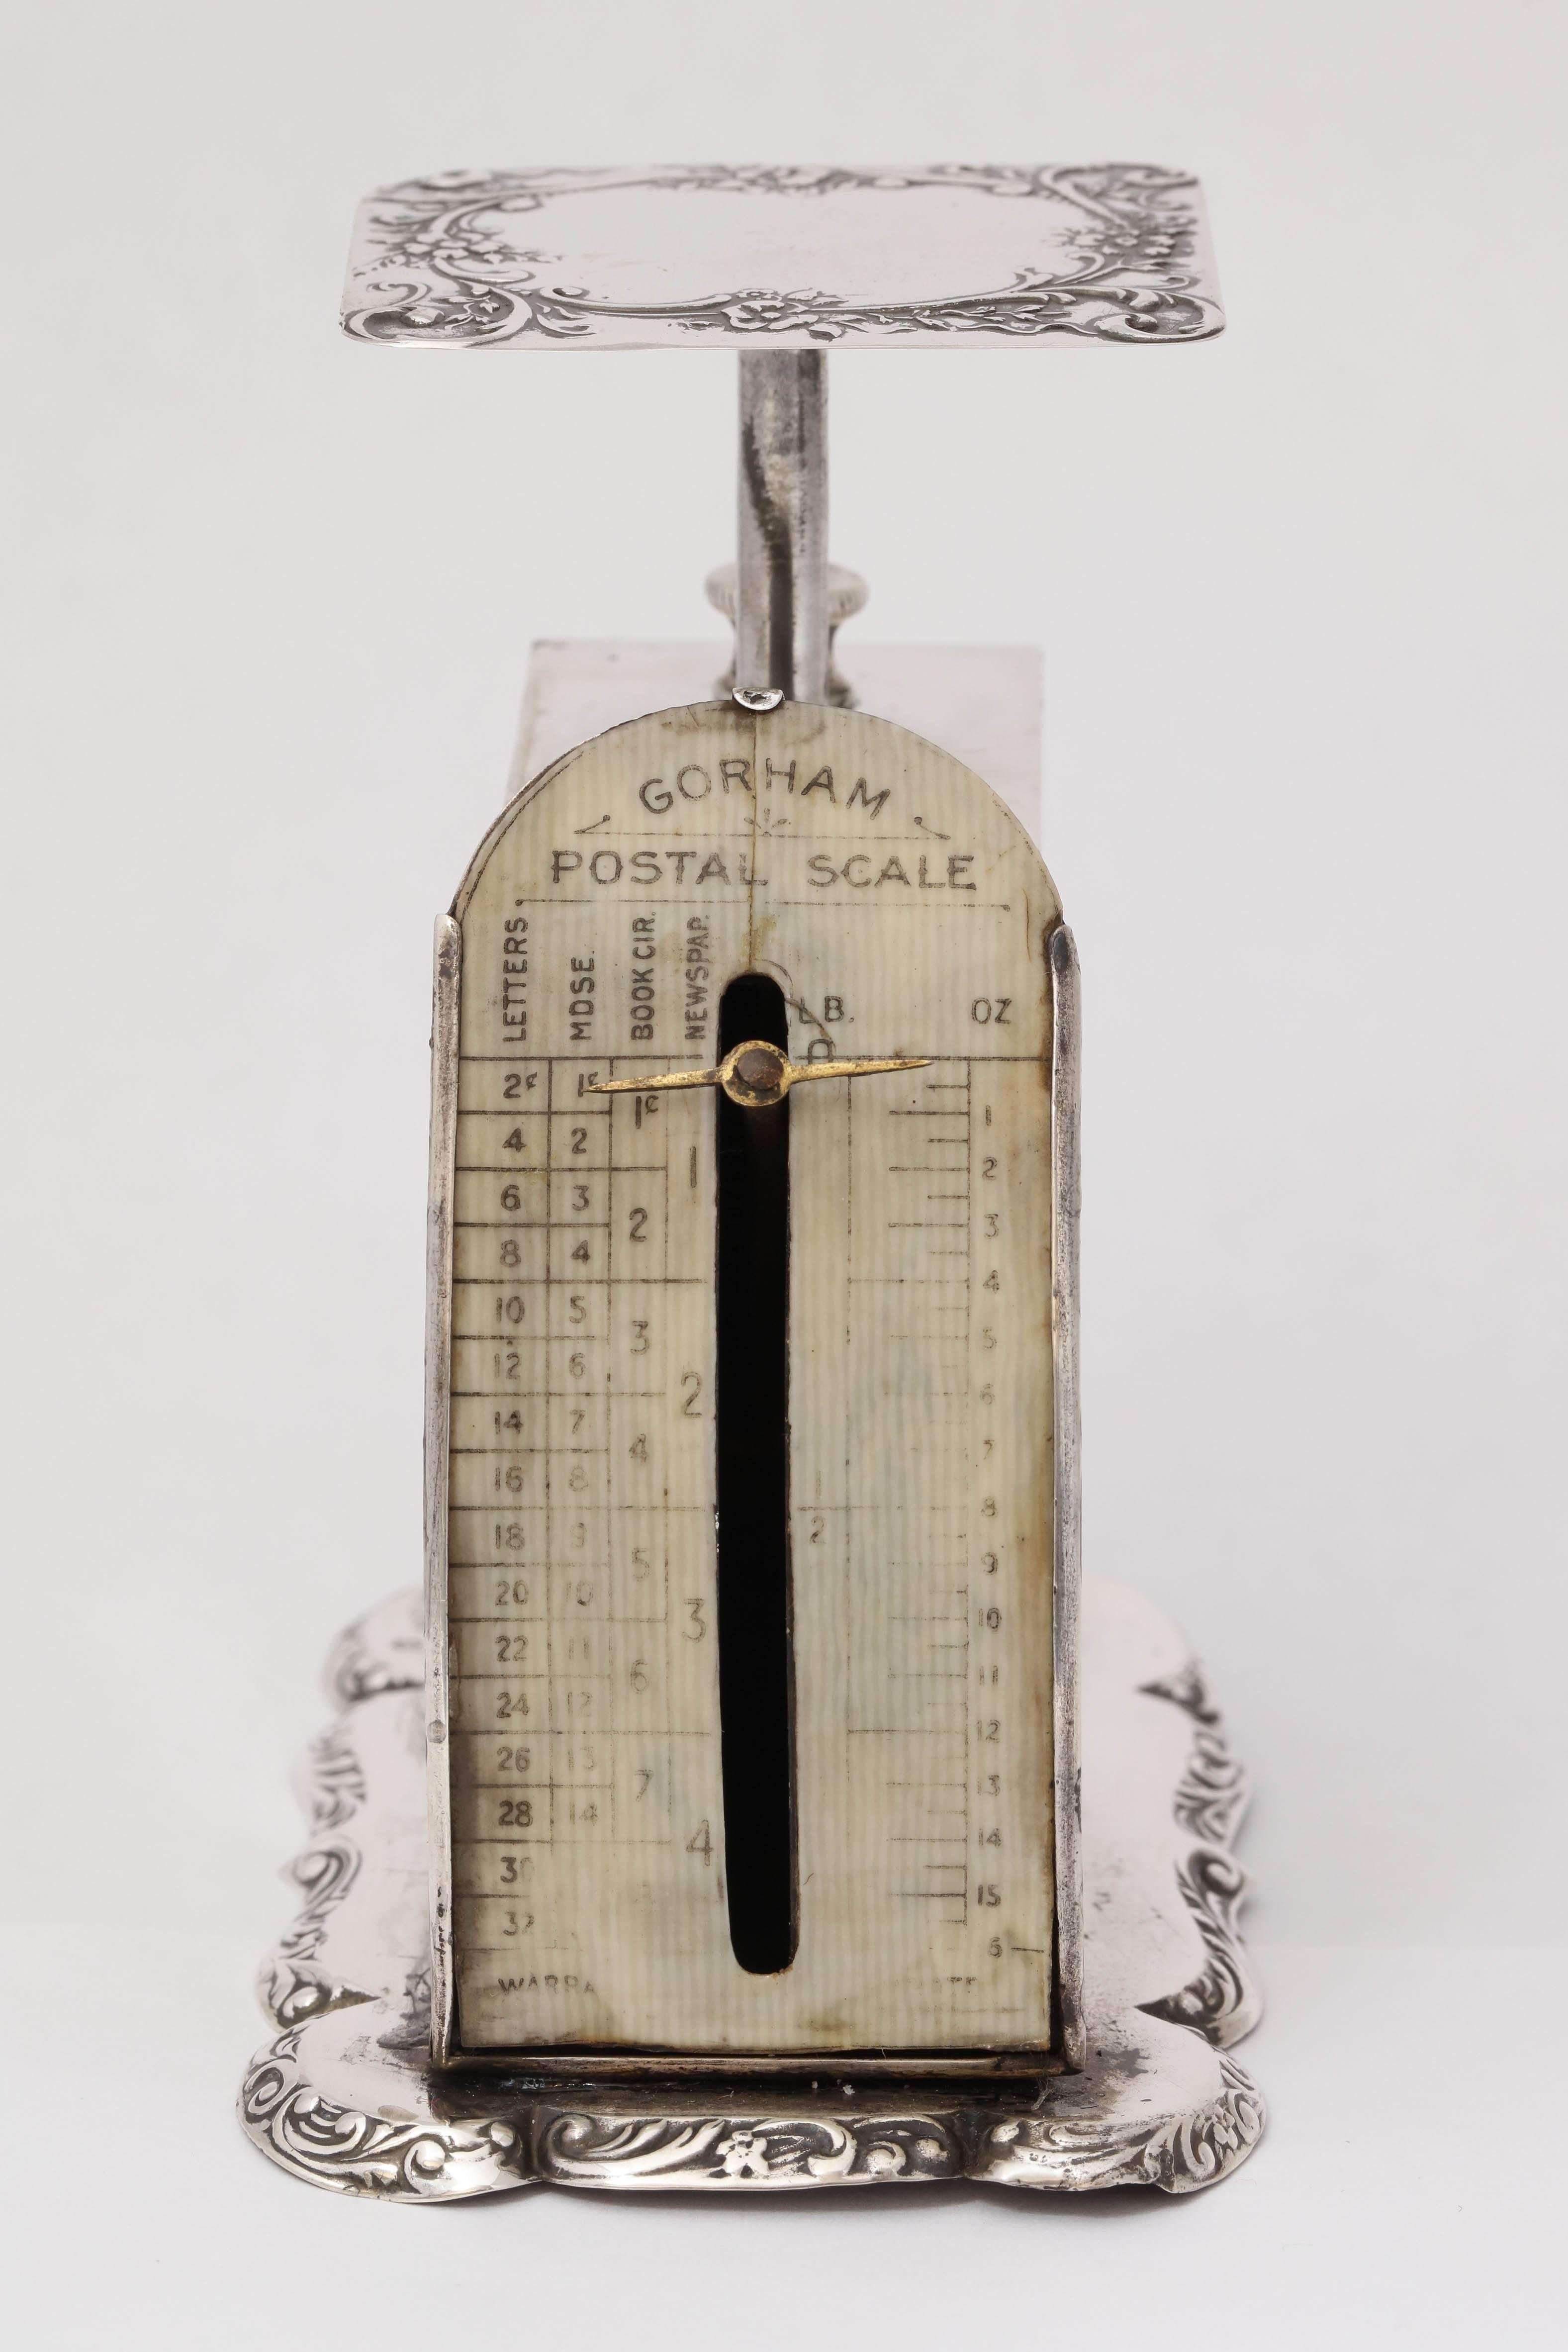 Lovely, Victorian, sterling silver postage scale, Gorham Manufacturing Company, Providence, Rhode Island, year marked for 1896. If looking at the scale head on, it measures 3 3/4 inches high x 2 inches wide x 3 inches deep. In working condition.